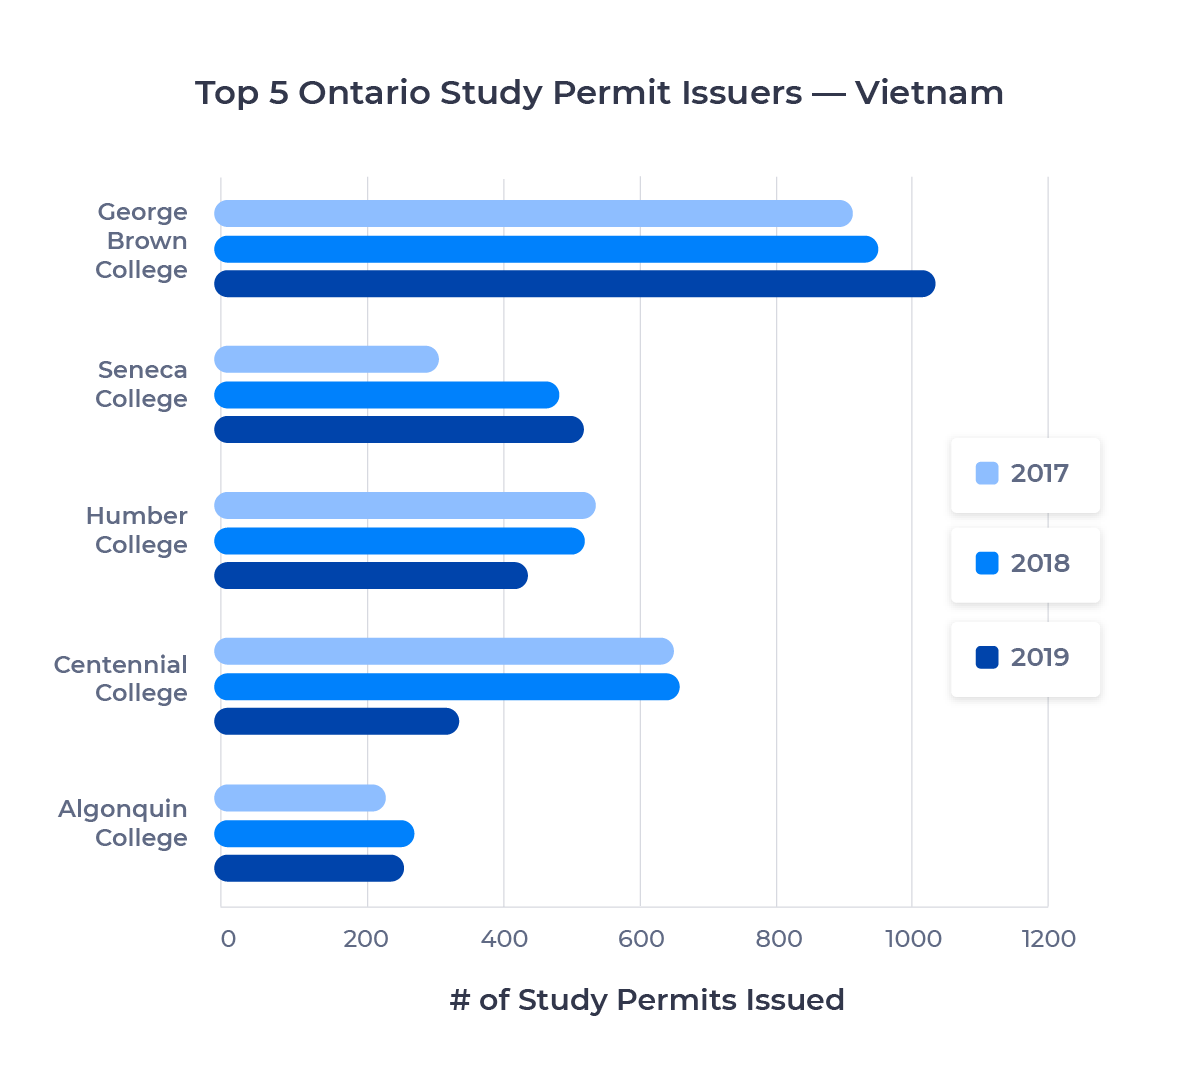 Bar chart showing the top five schools in Ontario for Vietnamese students by study permits issued. Described in detail below.